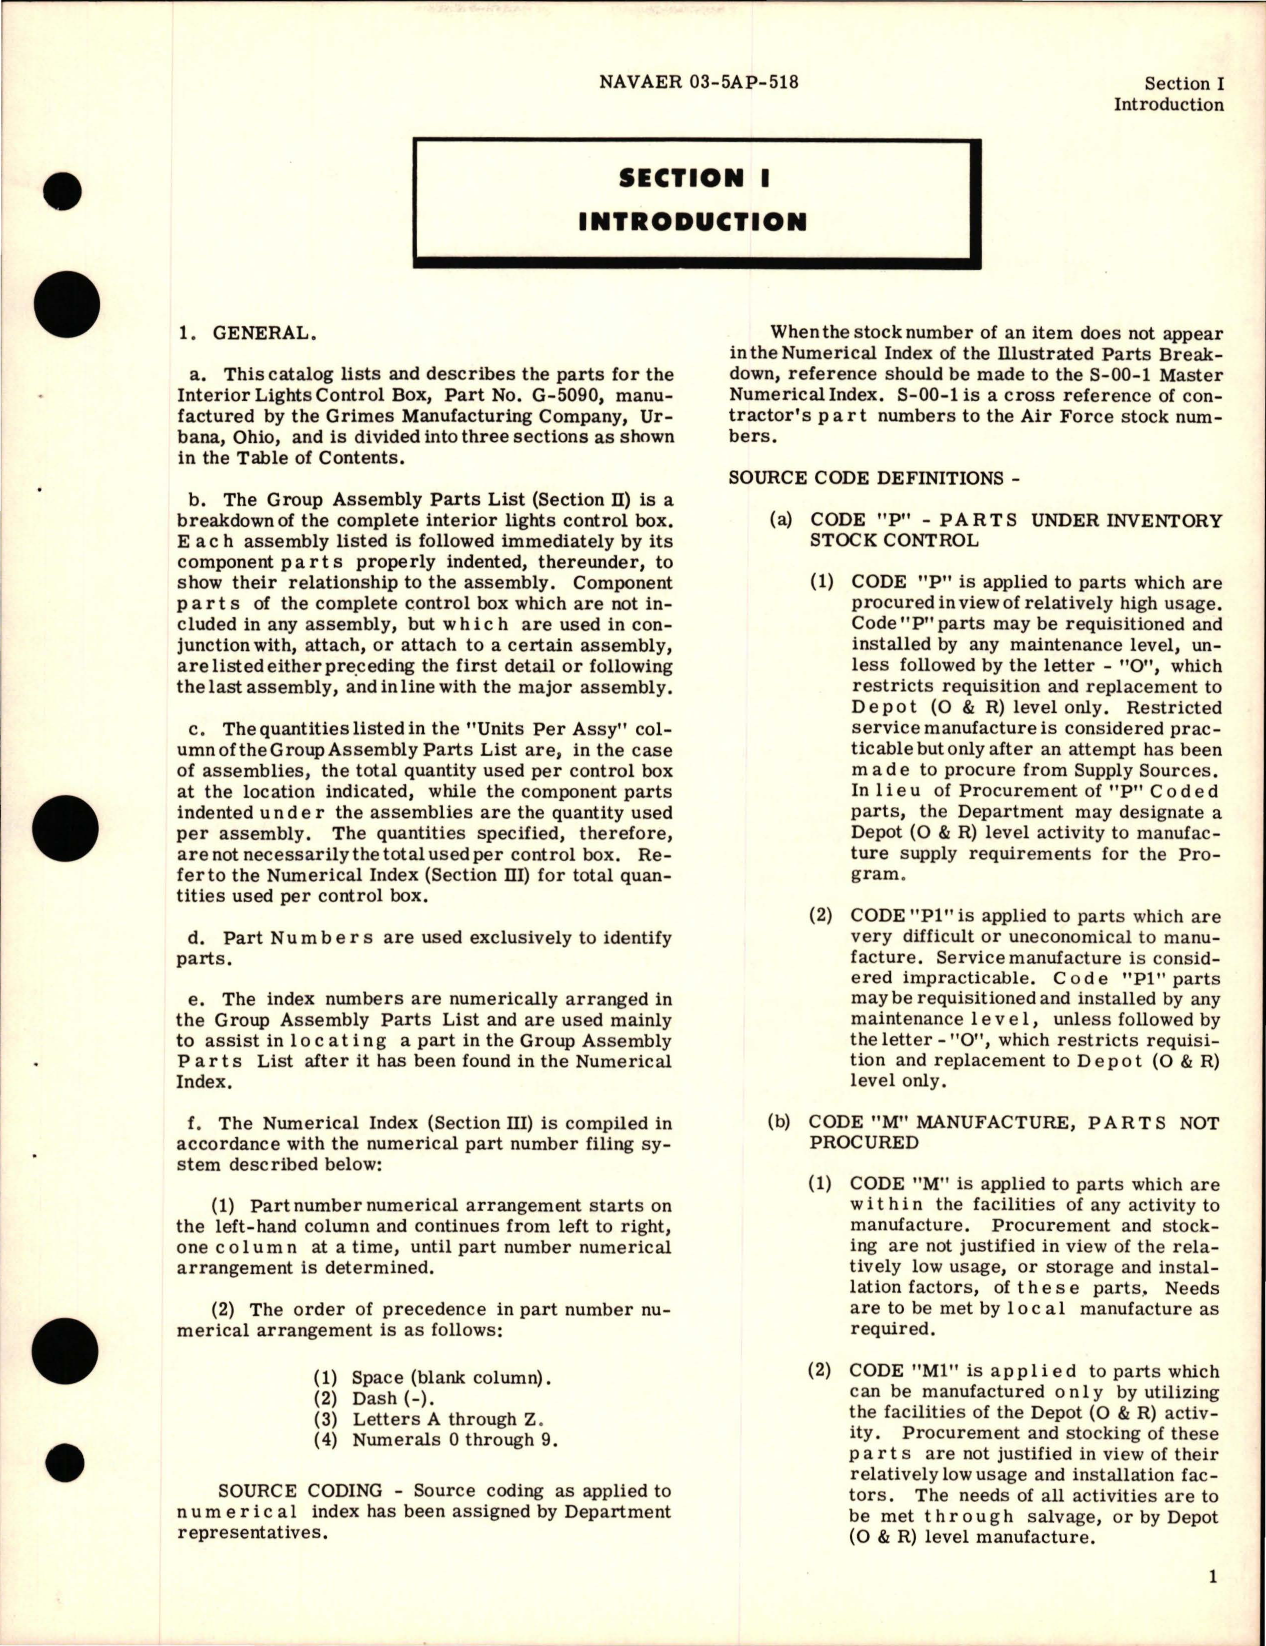 Sample page 5 from AirCorps Library document: Illustrated Parts Breakdown for Interior Lights Control Box - Part G-5090 